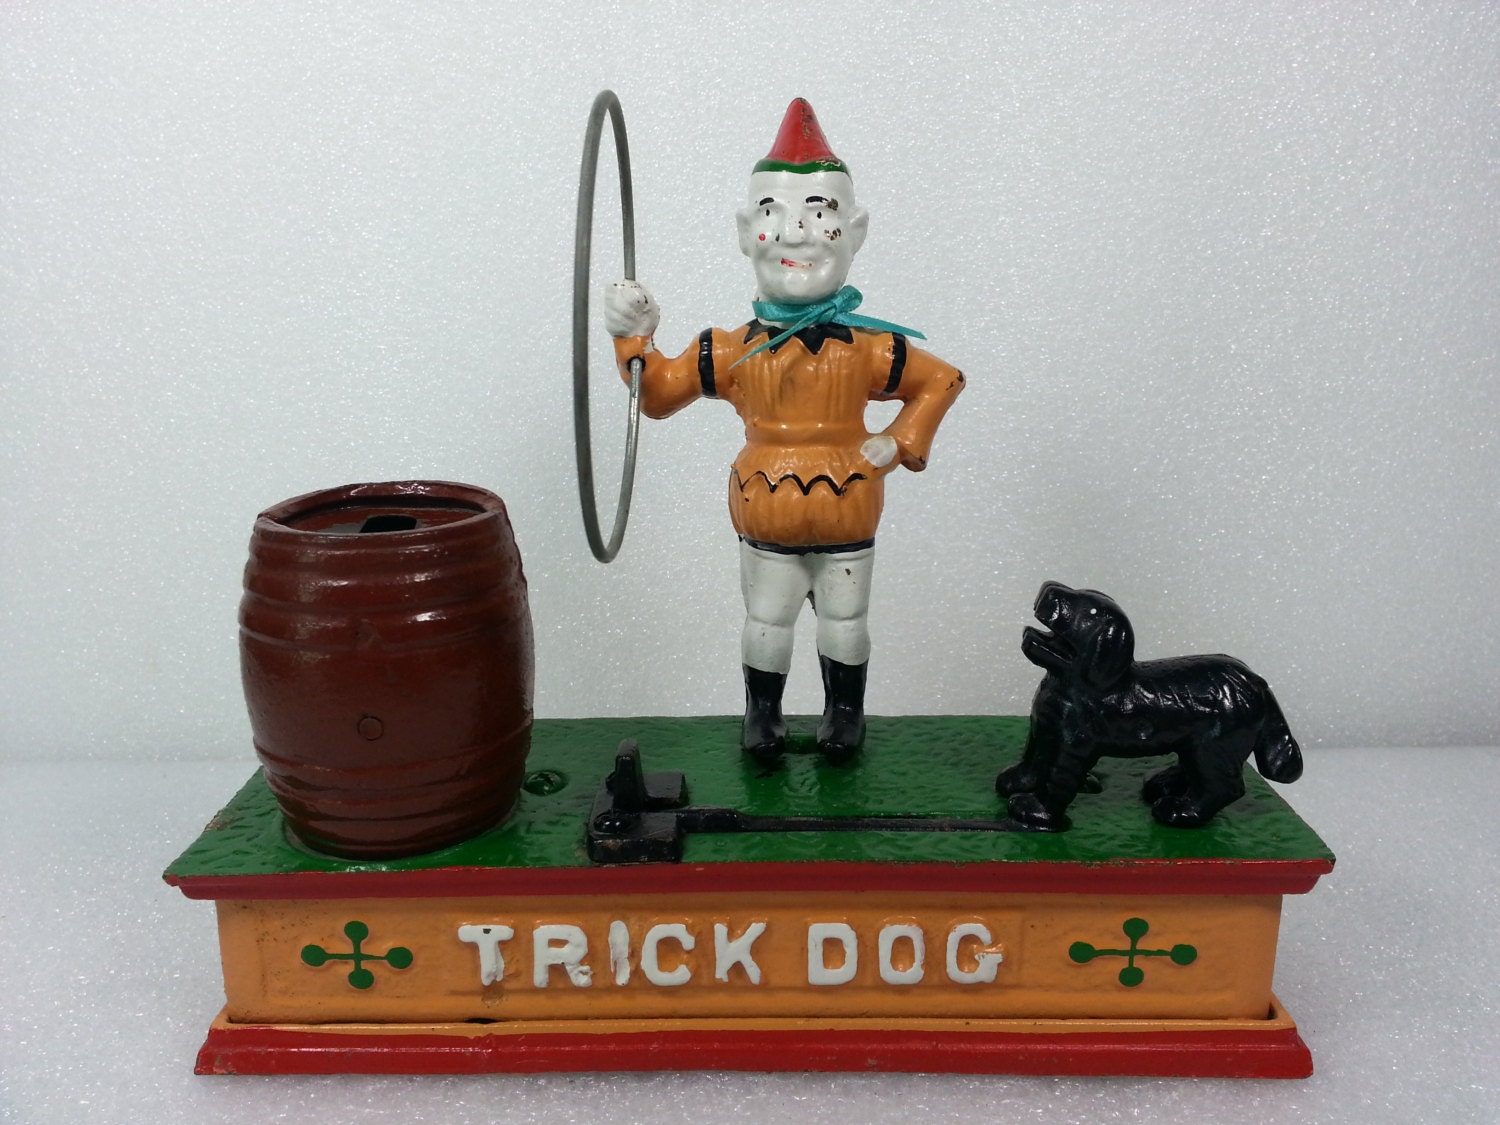 Vintage "Trick Dog" and Clown Bank - Circus Performance